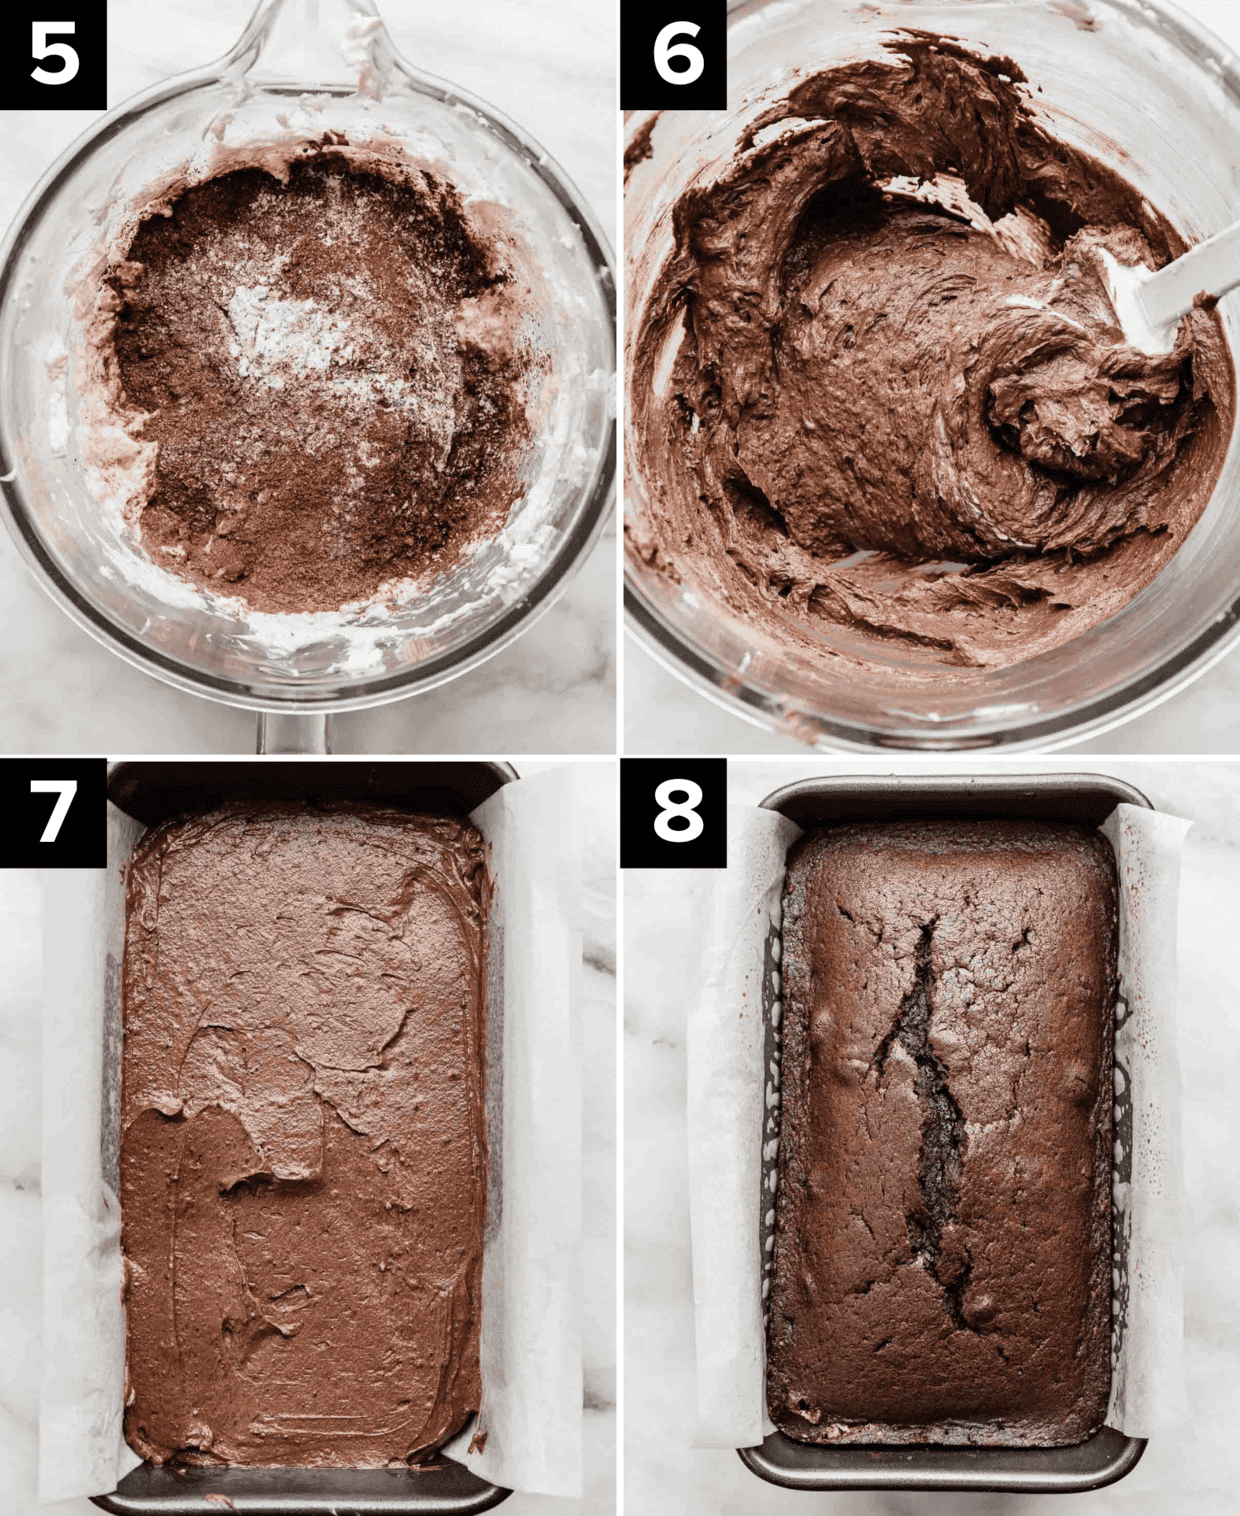 Four photos showing how to make Chocolate Pound Cake, top left is brown dry ingredients in glass bowl, top right is Chocolate Pound Cake batter in a glass bowl, bottom left is Chocolate Pound Cake batter smoothed into gray bread pan, bottom right is baked Chocolate Pound Cake in a bread pan.